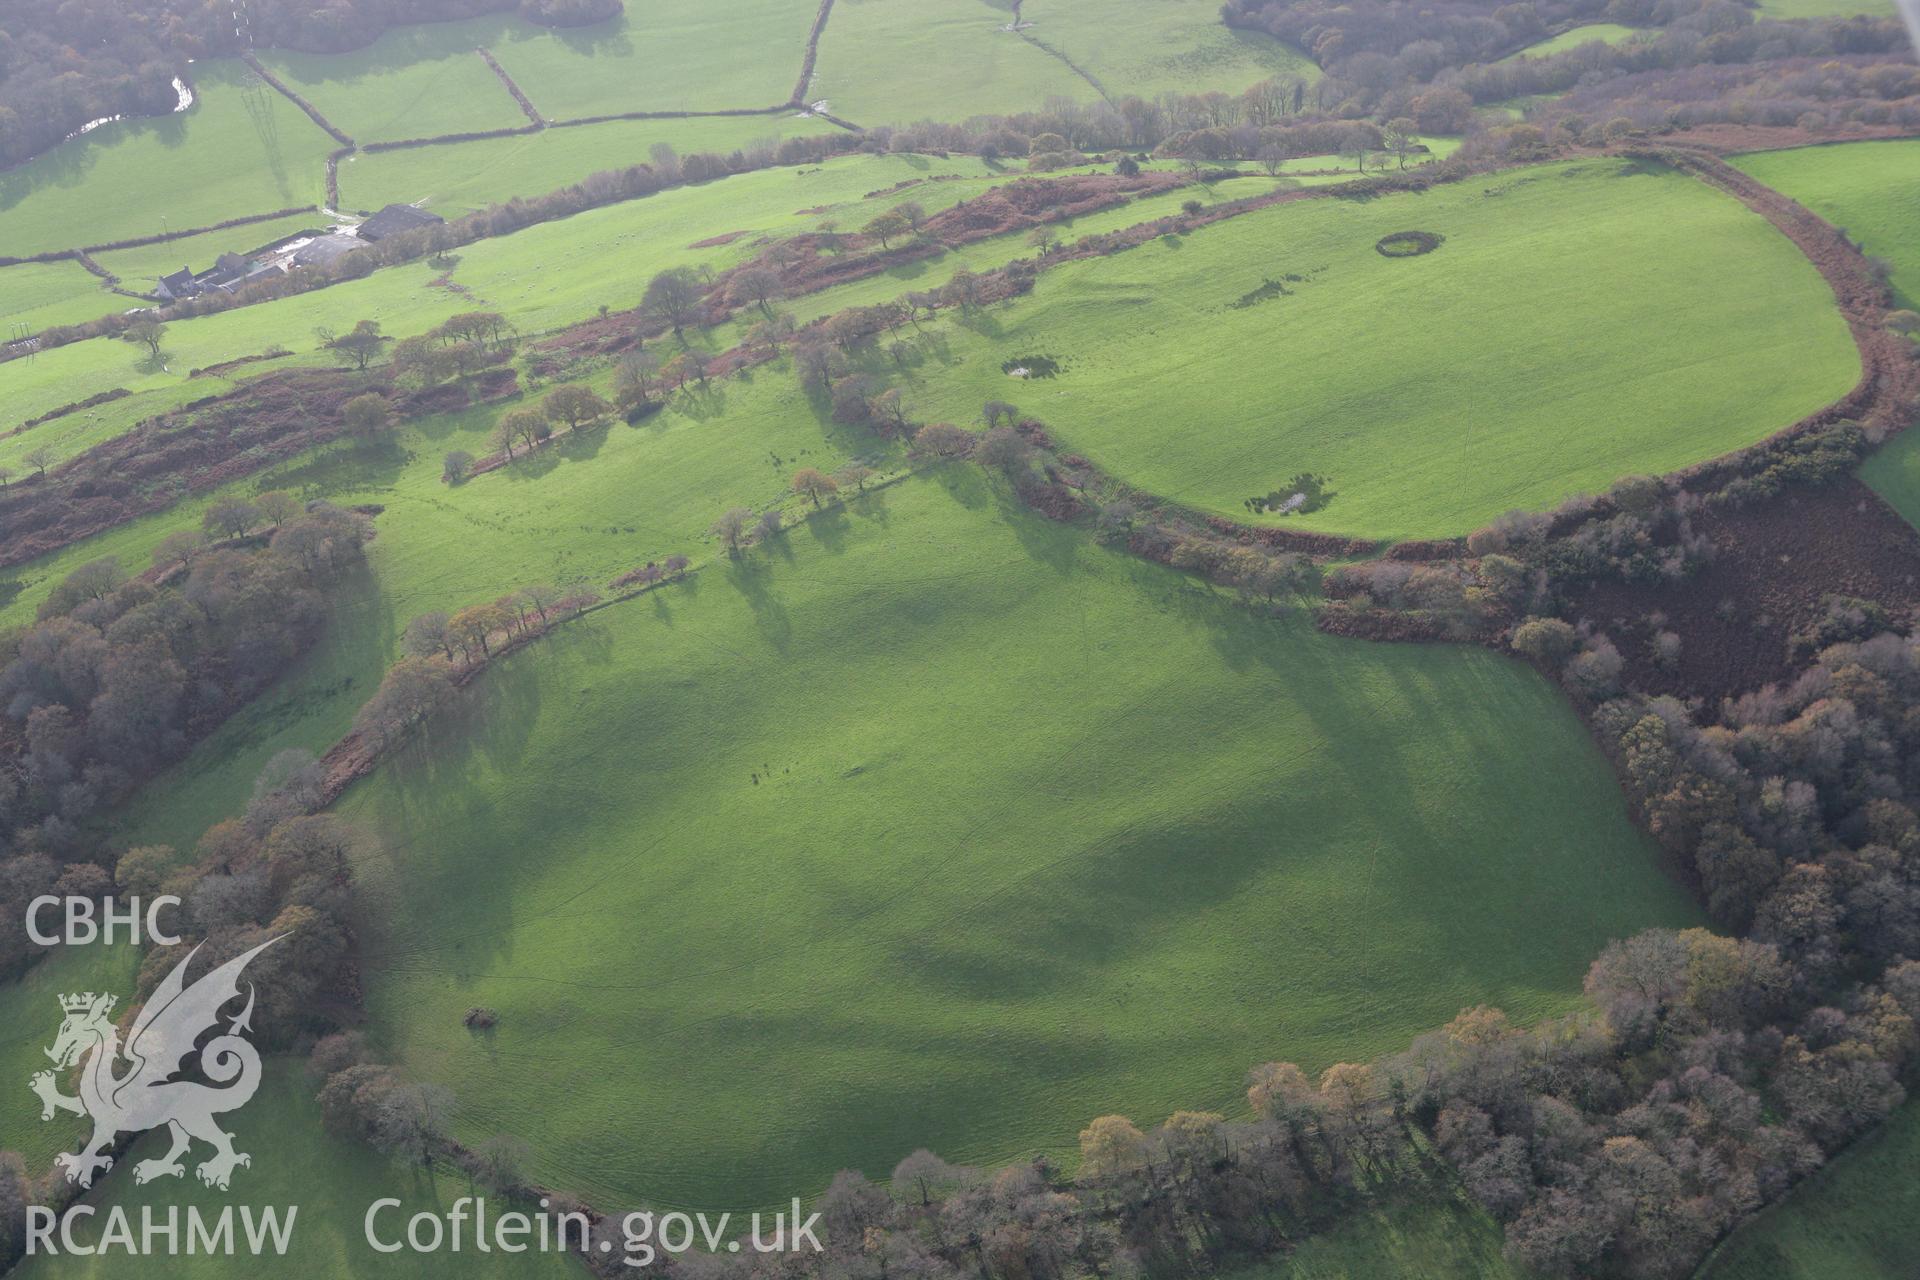 RCAHMW colour oblique photograph of Caerau Hillfort, Rhiwsaeson, Llantrisant. Taken by Toby Driver on 17/11/2011.